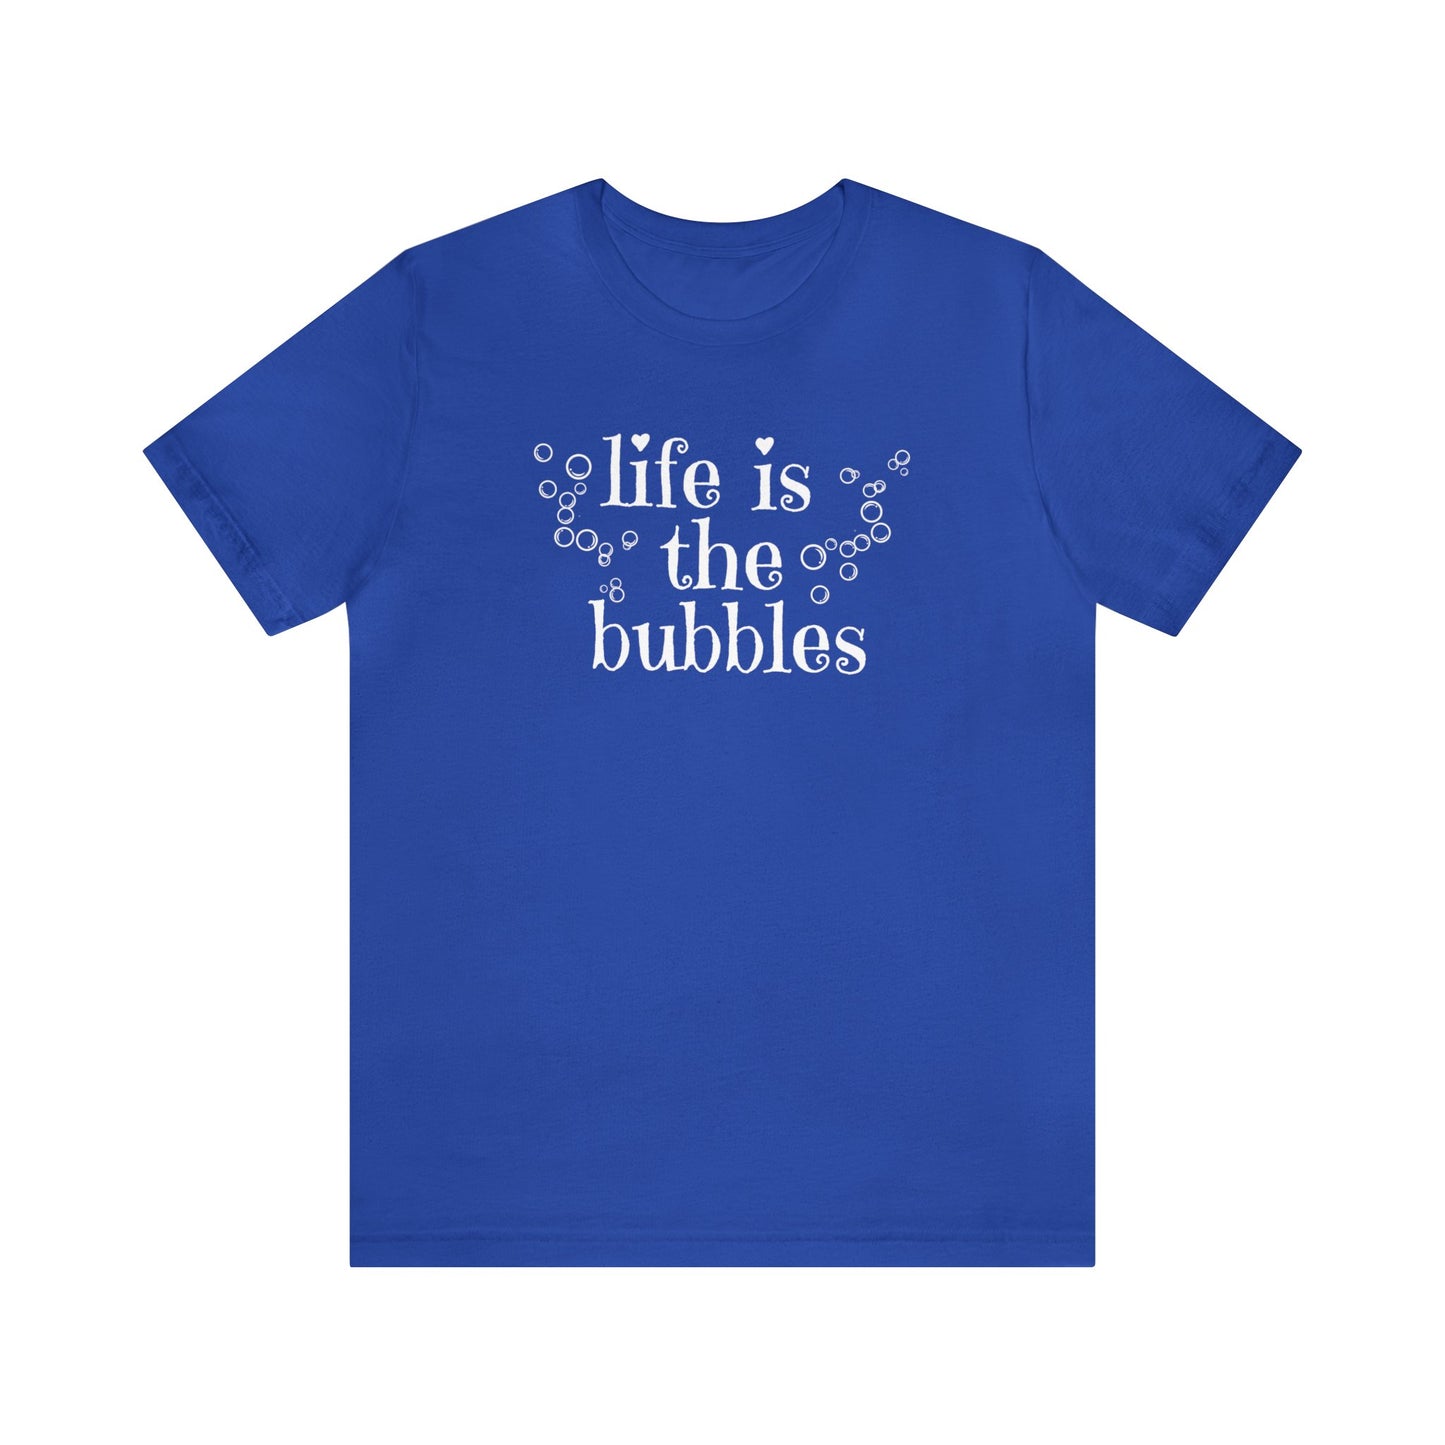 Youth Crew Neck Life is the Bubbles